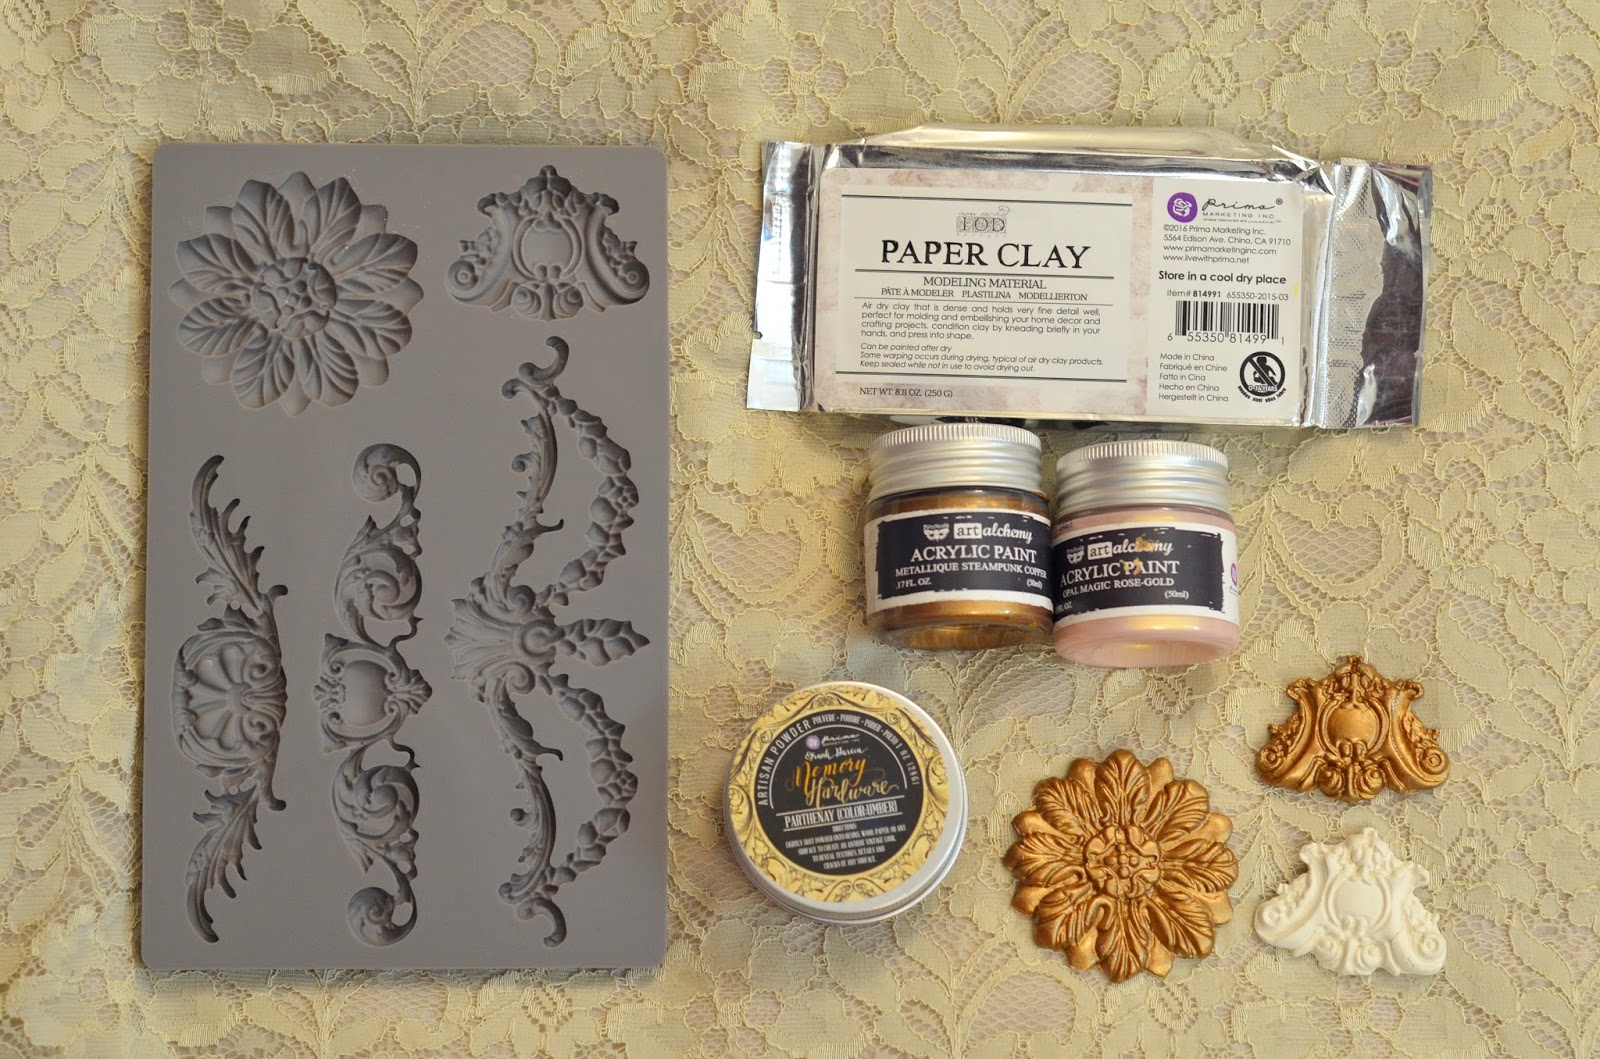 Crafters Corner : Prima Marketing - Paper clay and Vintage Art